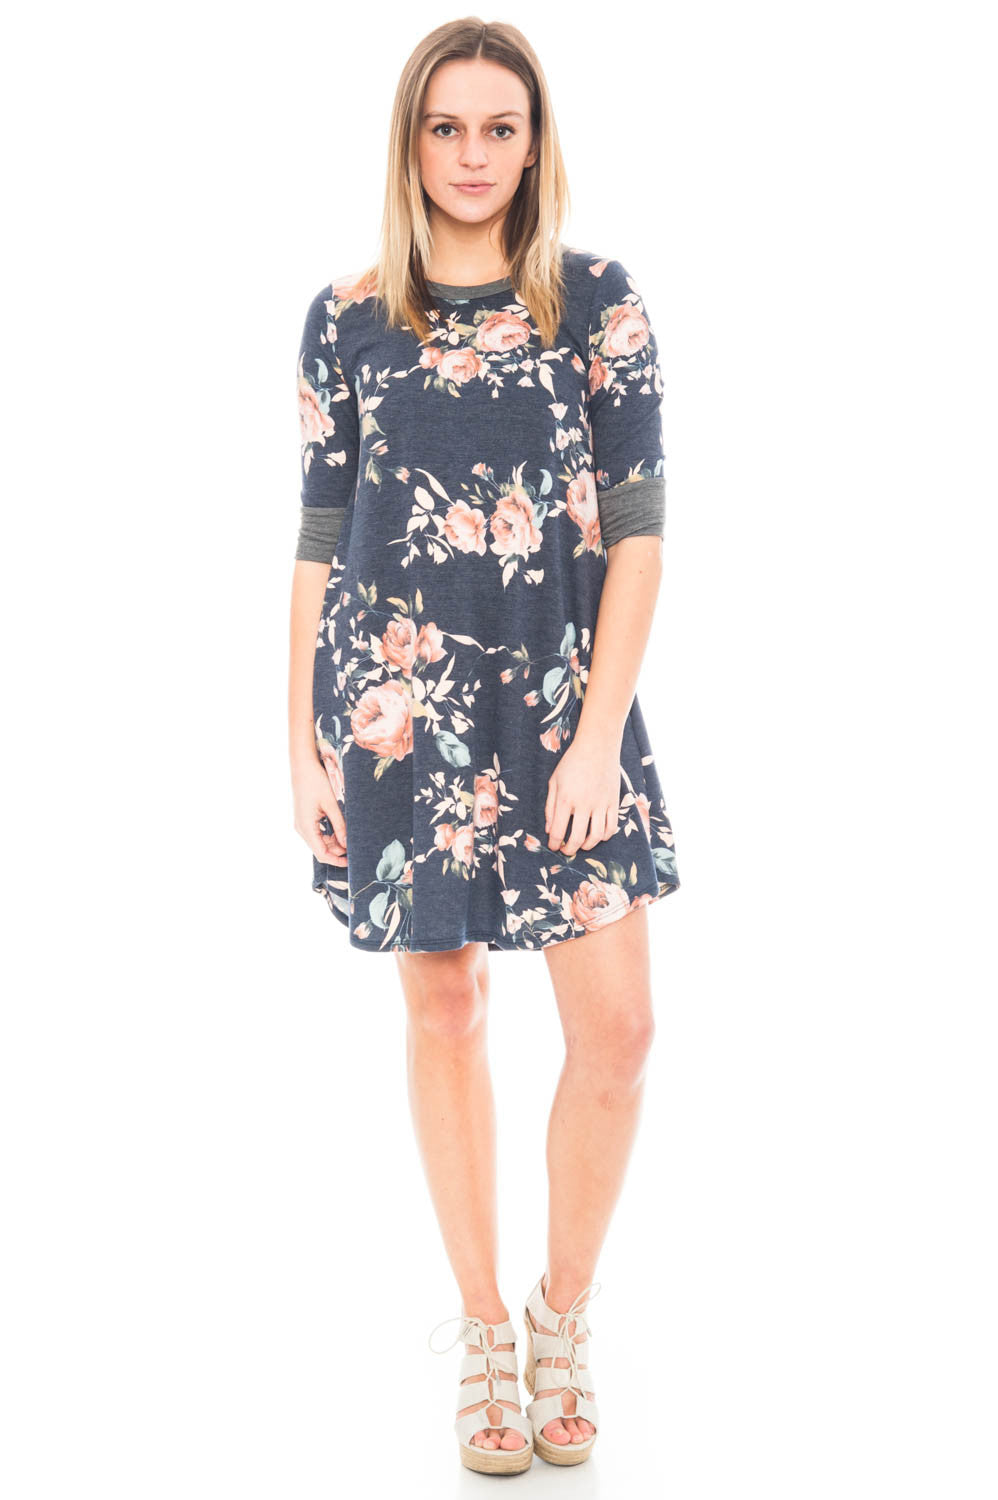 Dress - Floral Shift Dress with Pockets